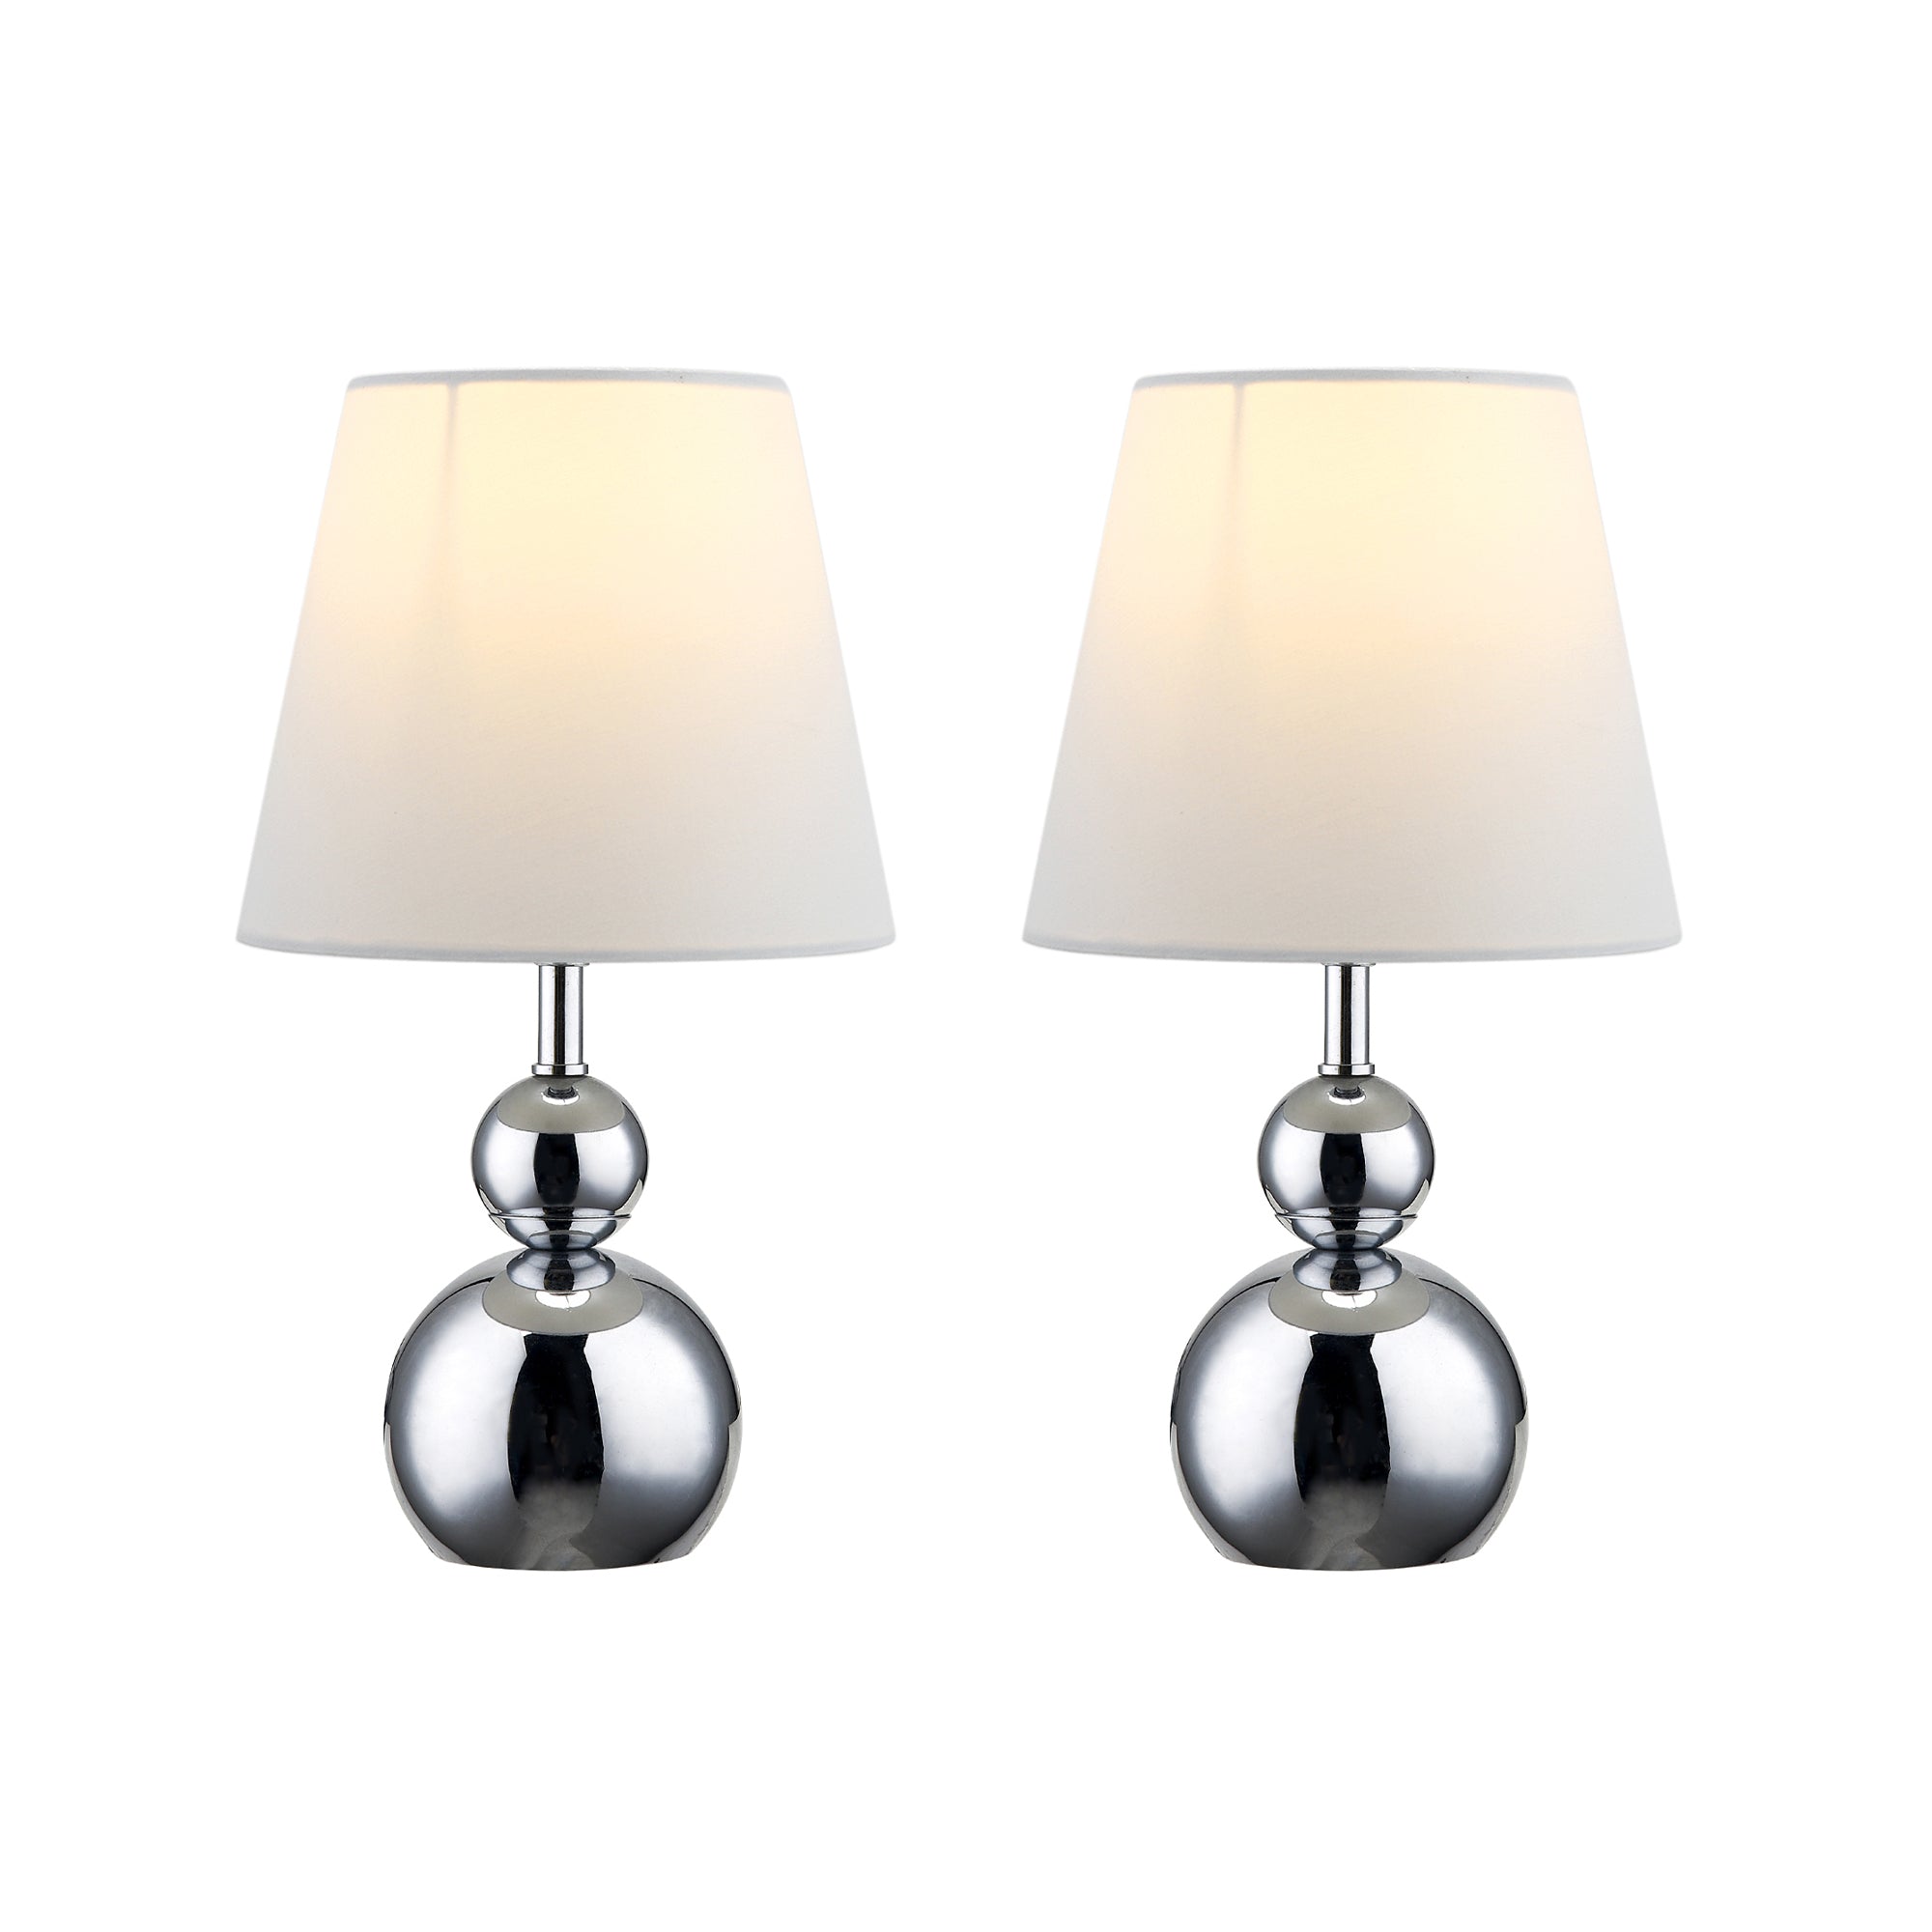 Hulu Touch Table Lamp - White (Set of 2)